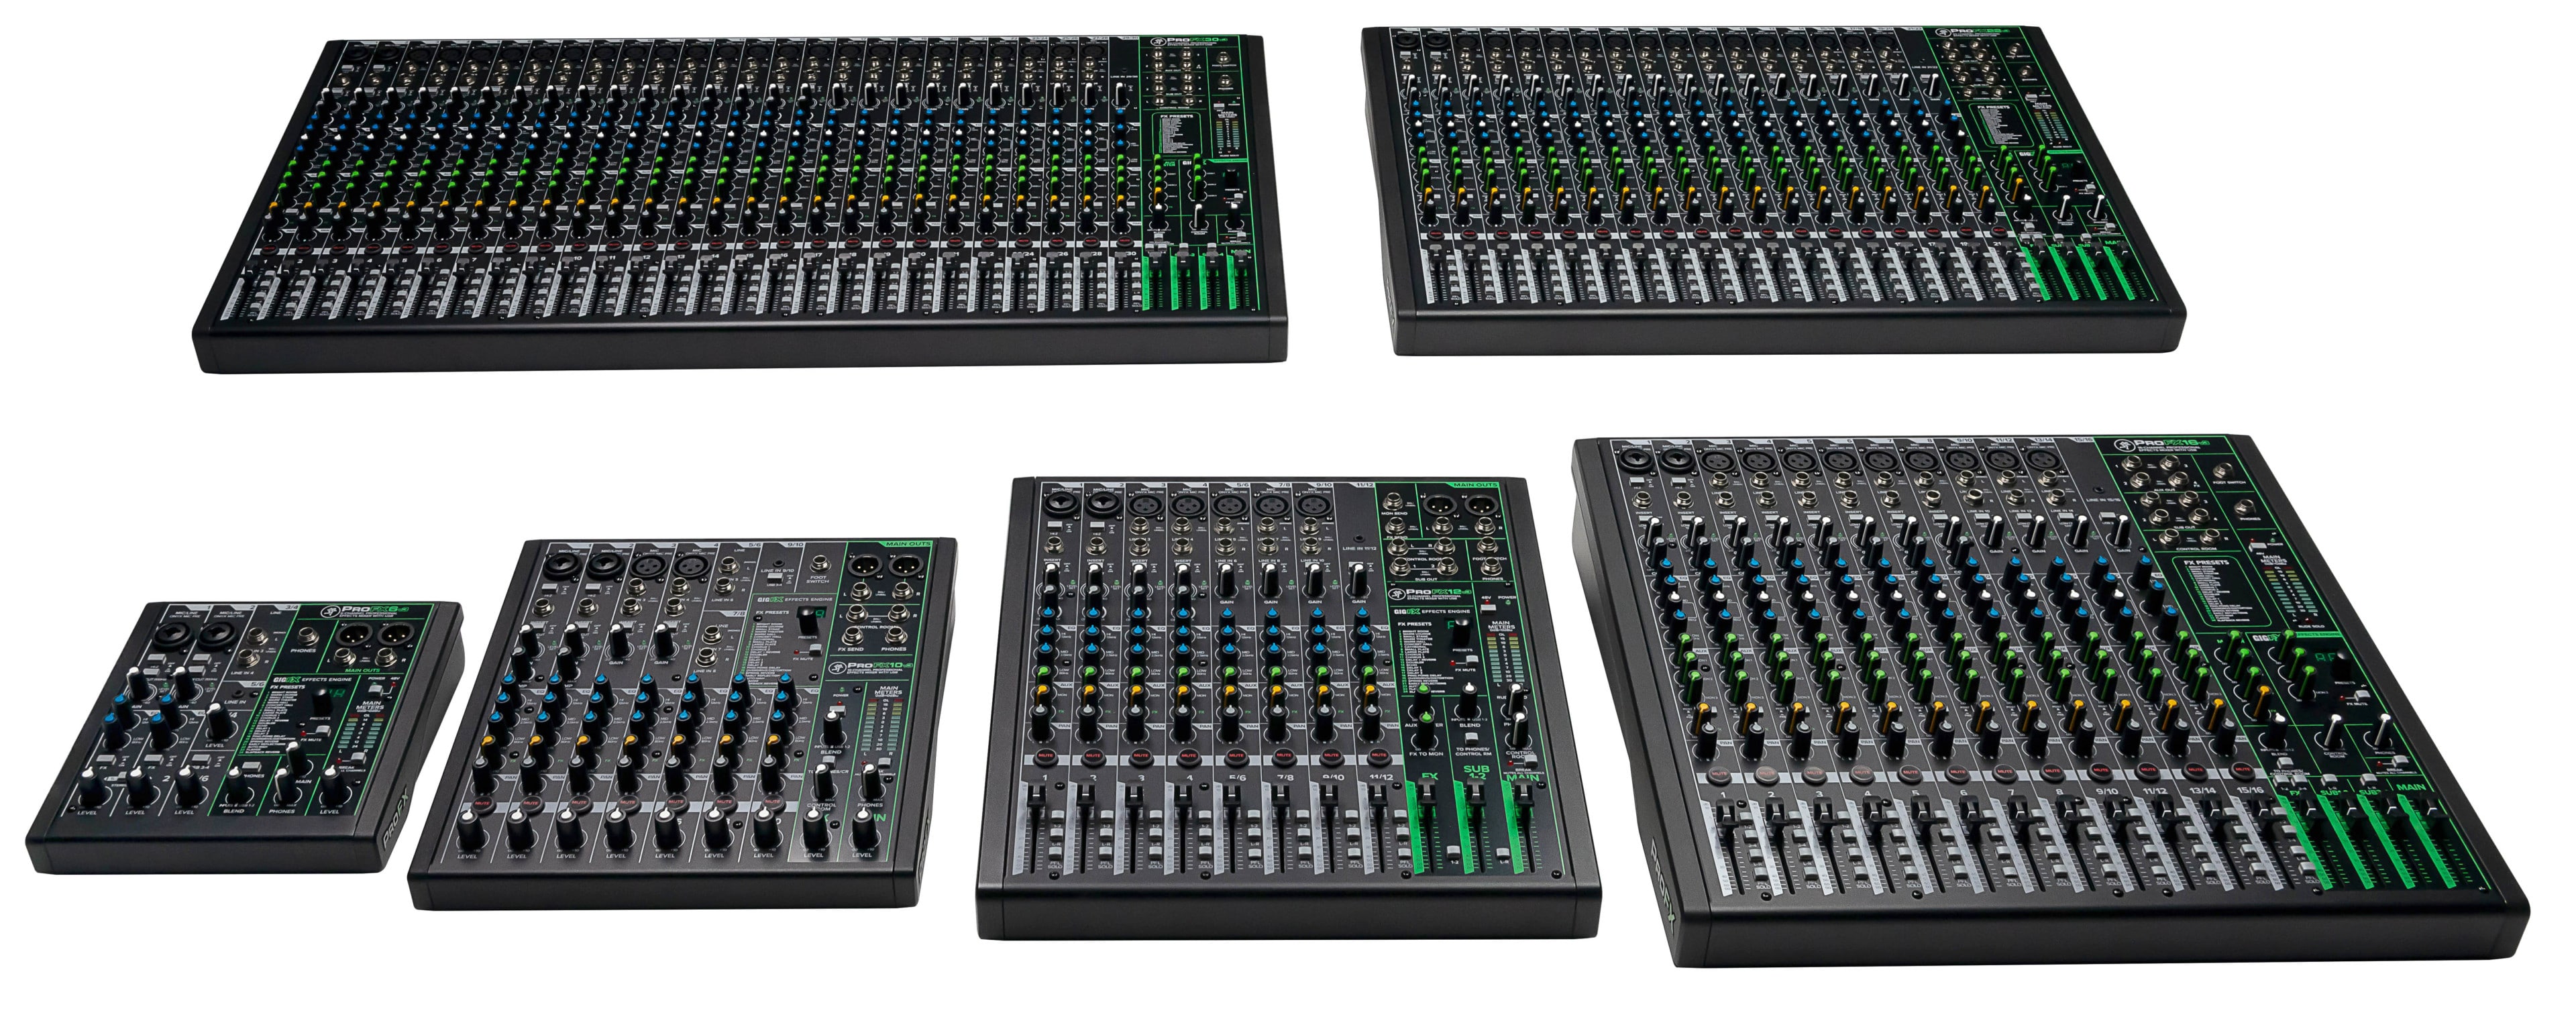 Mackie Elevates ProFX Series with Professional Upgrades